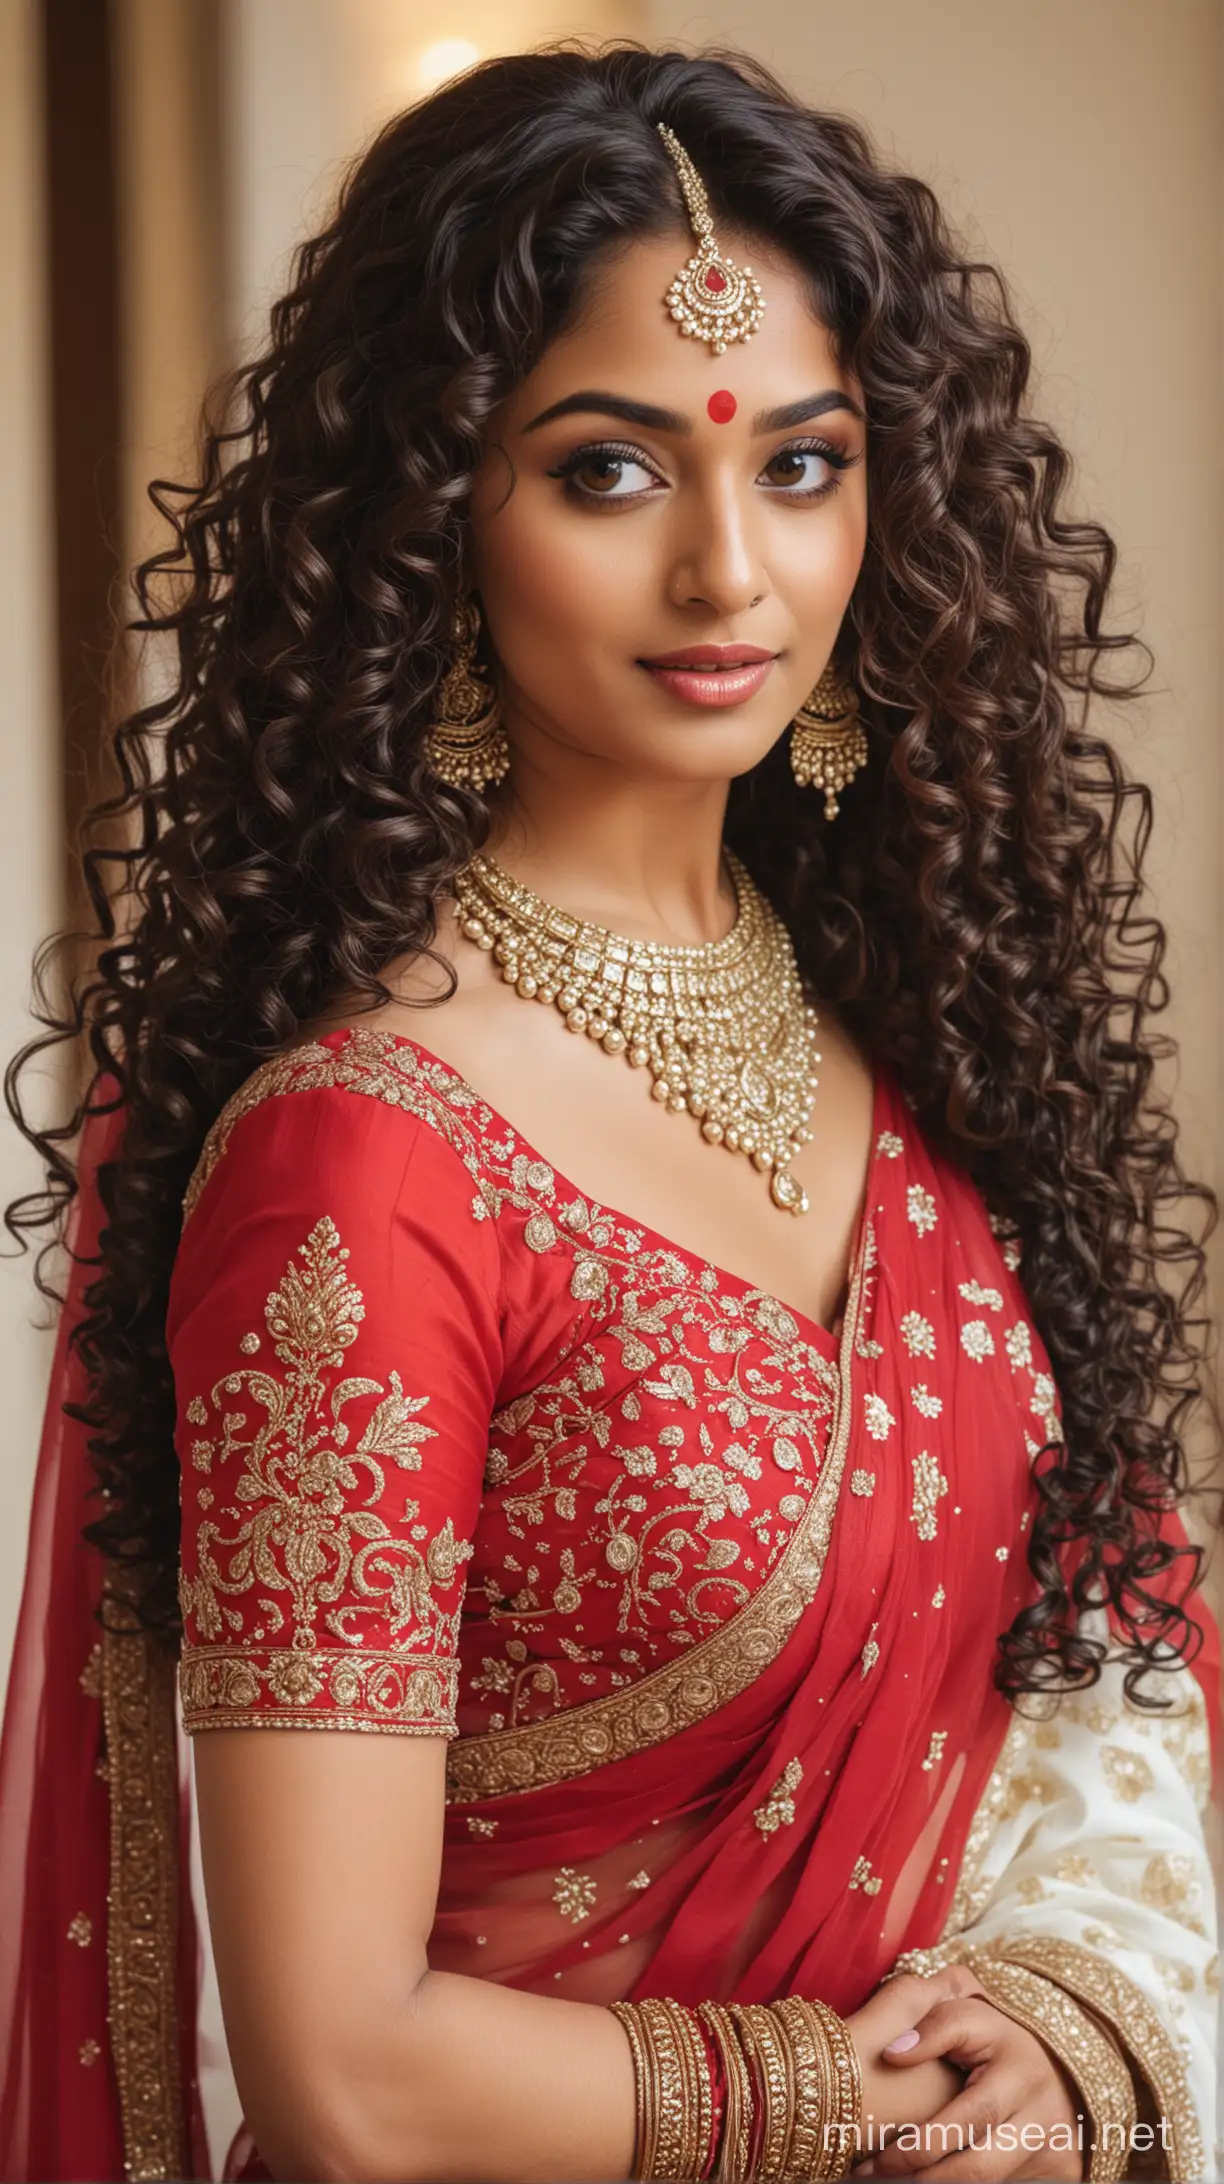 indian bride long curly hair, red saree and white ornaments